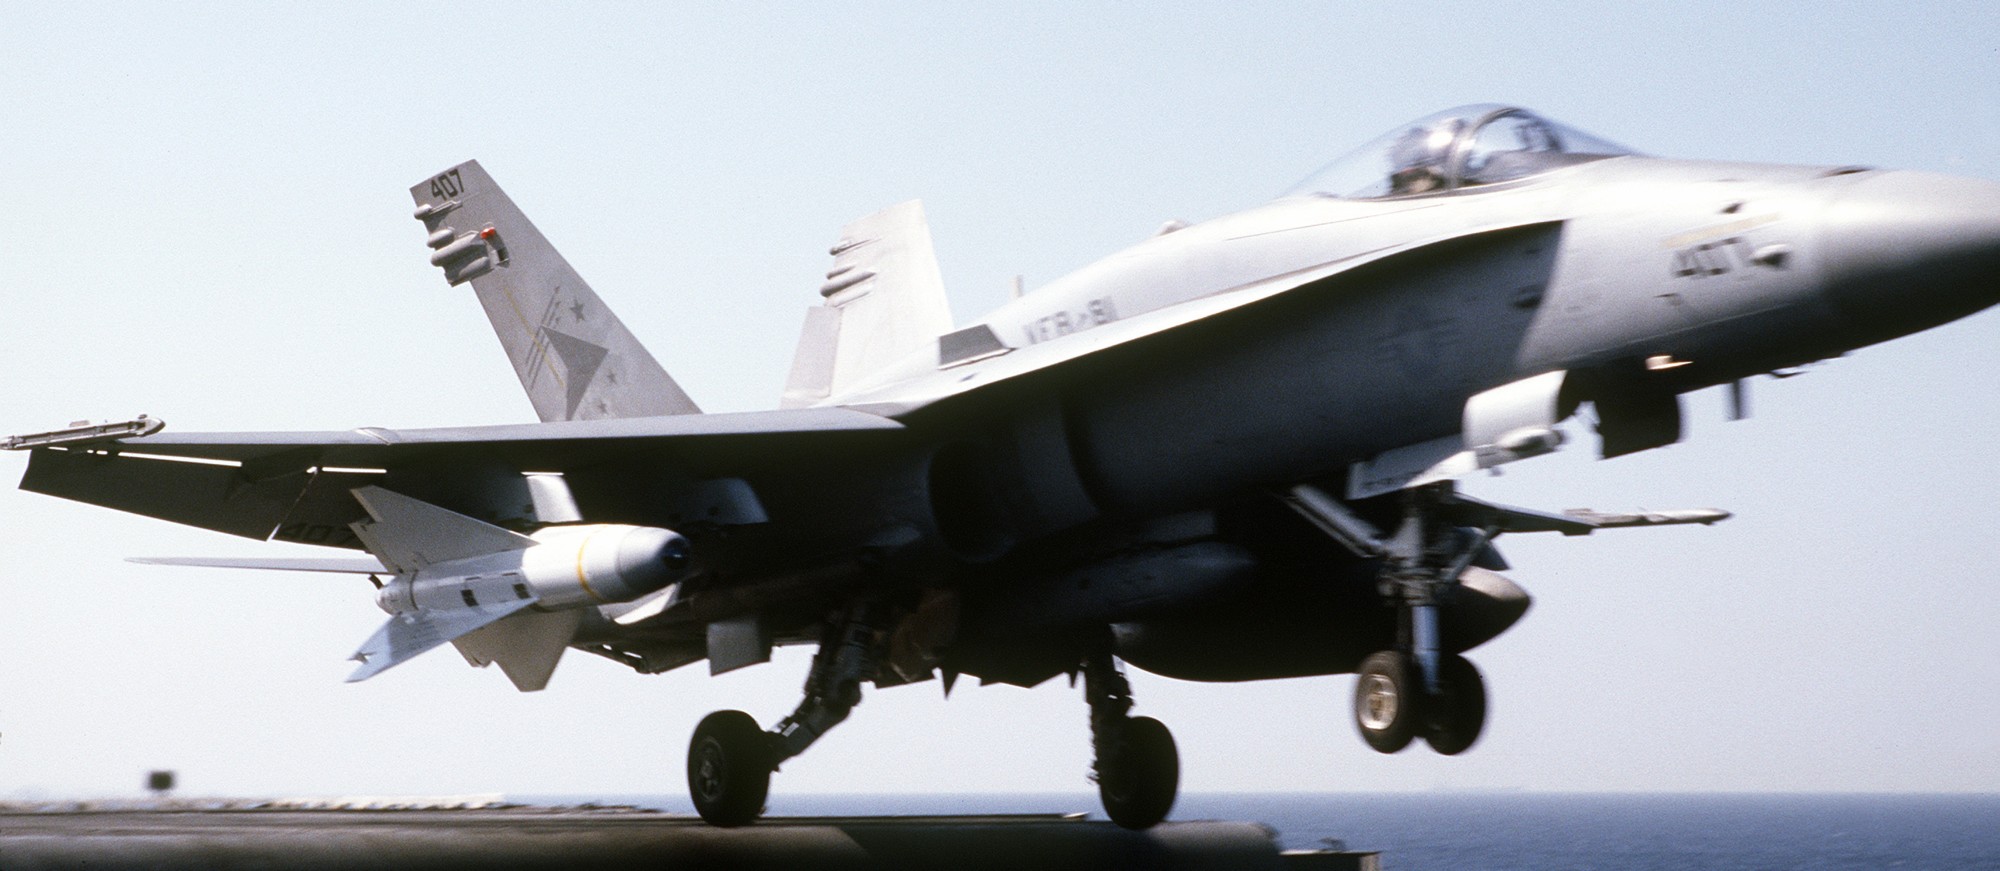 vfa-81 sunliners f/a-18c hornet agm-62 walleye missile